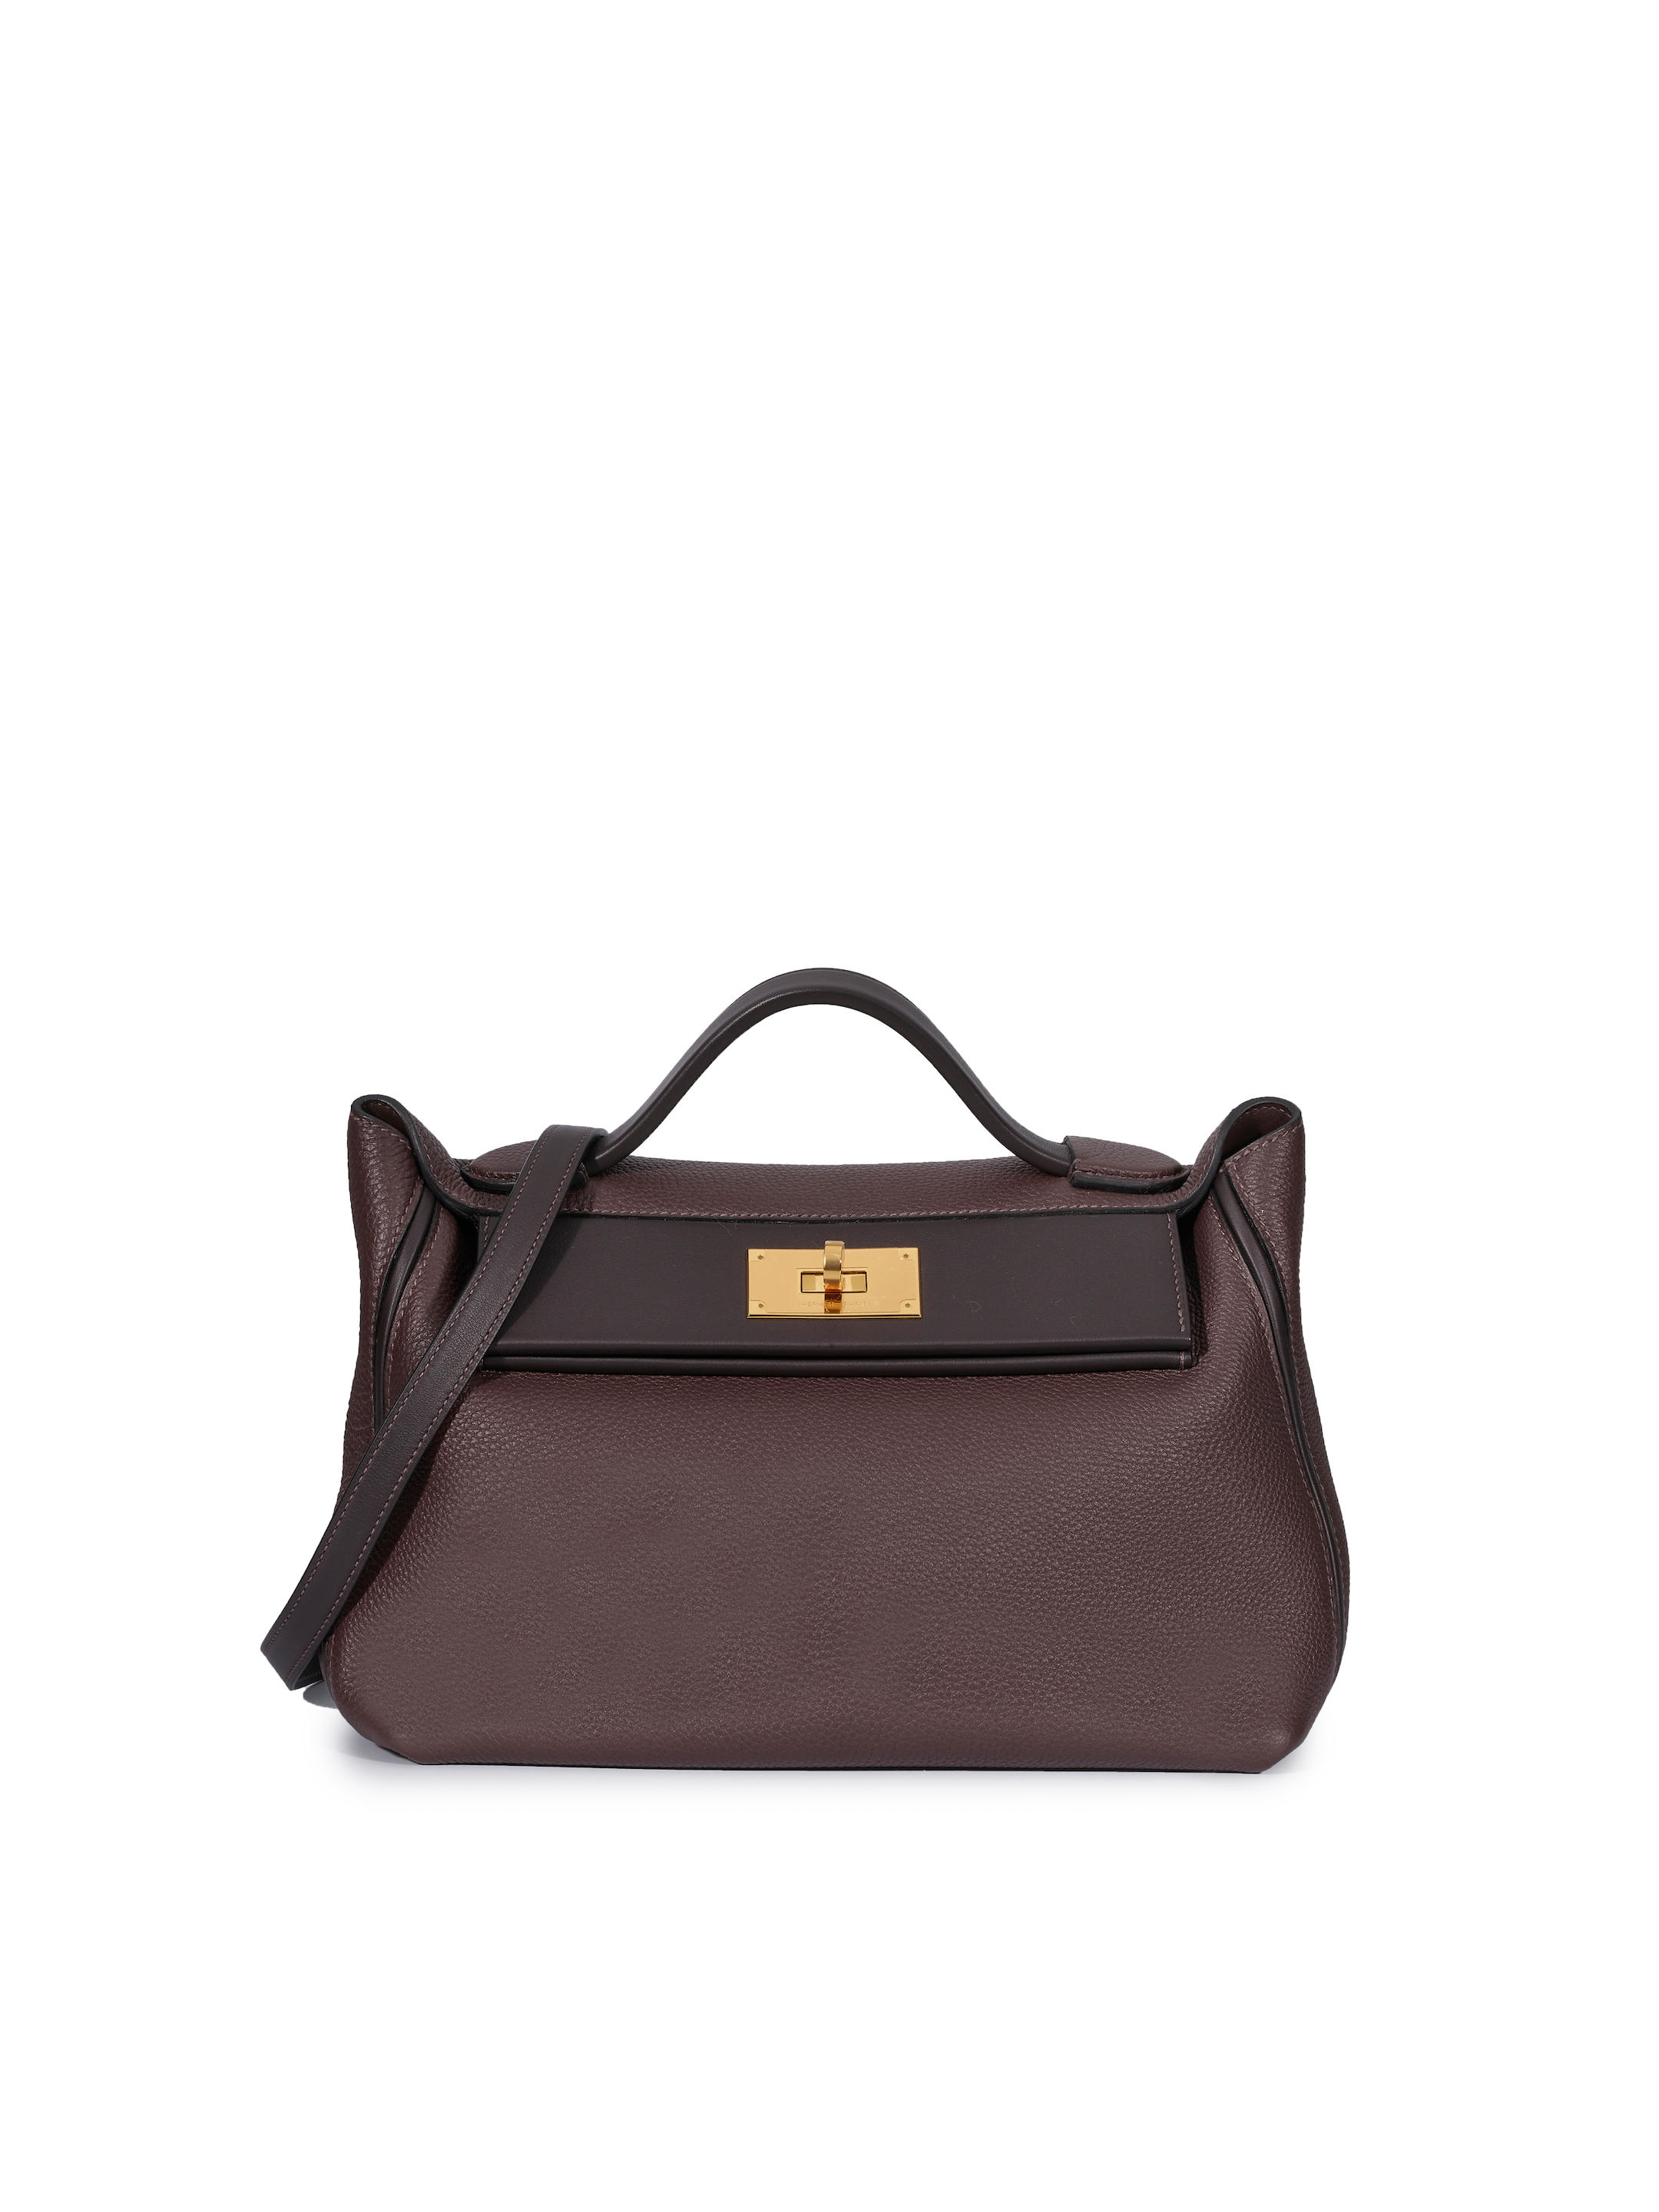 HERMÈS TWO-TONED ROUGE SELLIER TOGO AND SWIFT 24/24 WITH GOLD HARDWARE  (Includes original dust bags) - Bonhams